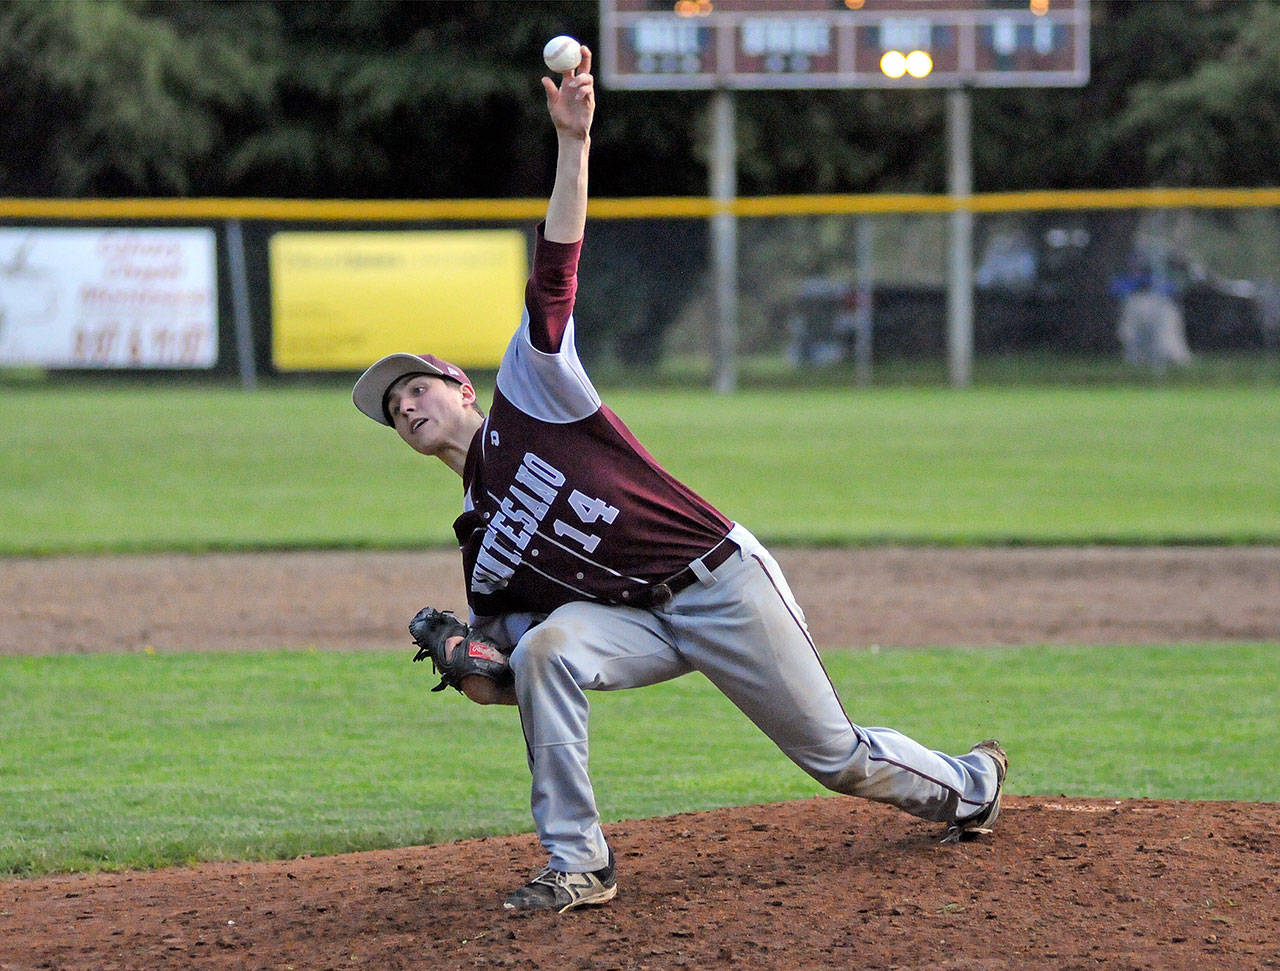 Montesano starting pitcher Cyrus Parsons throws a pitch during Wednesday’s 9-2 victory over Forks at Vessey Field. Parson earned the win, allowing two earned runs in 3 2/3 innings of work. (Ryan Sparks | Grays Harbor News Group)